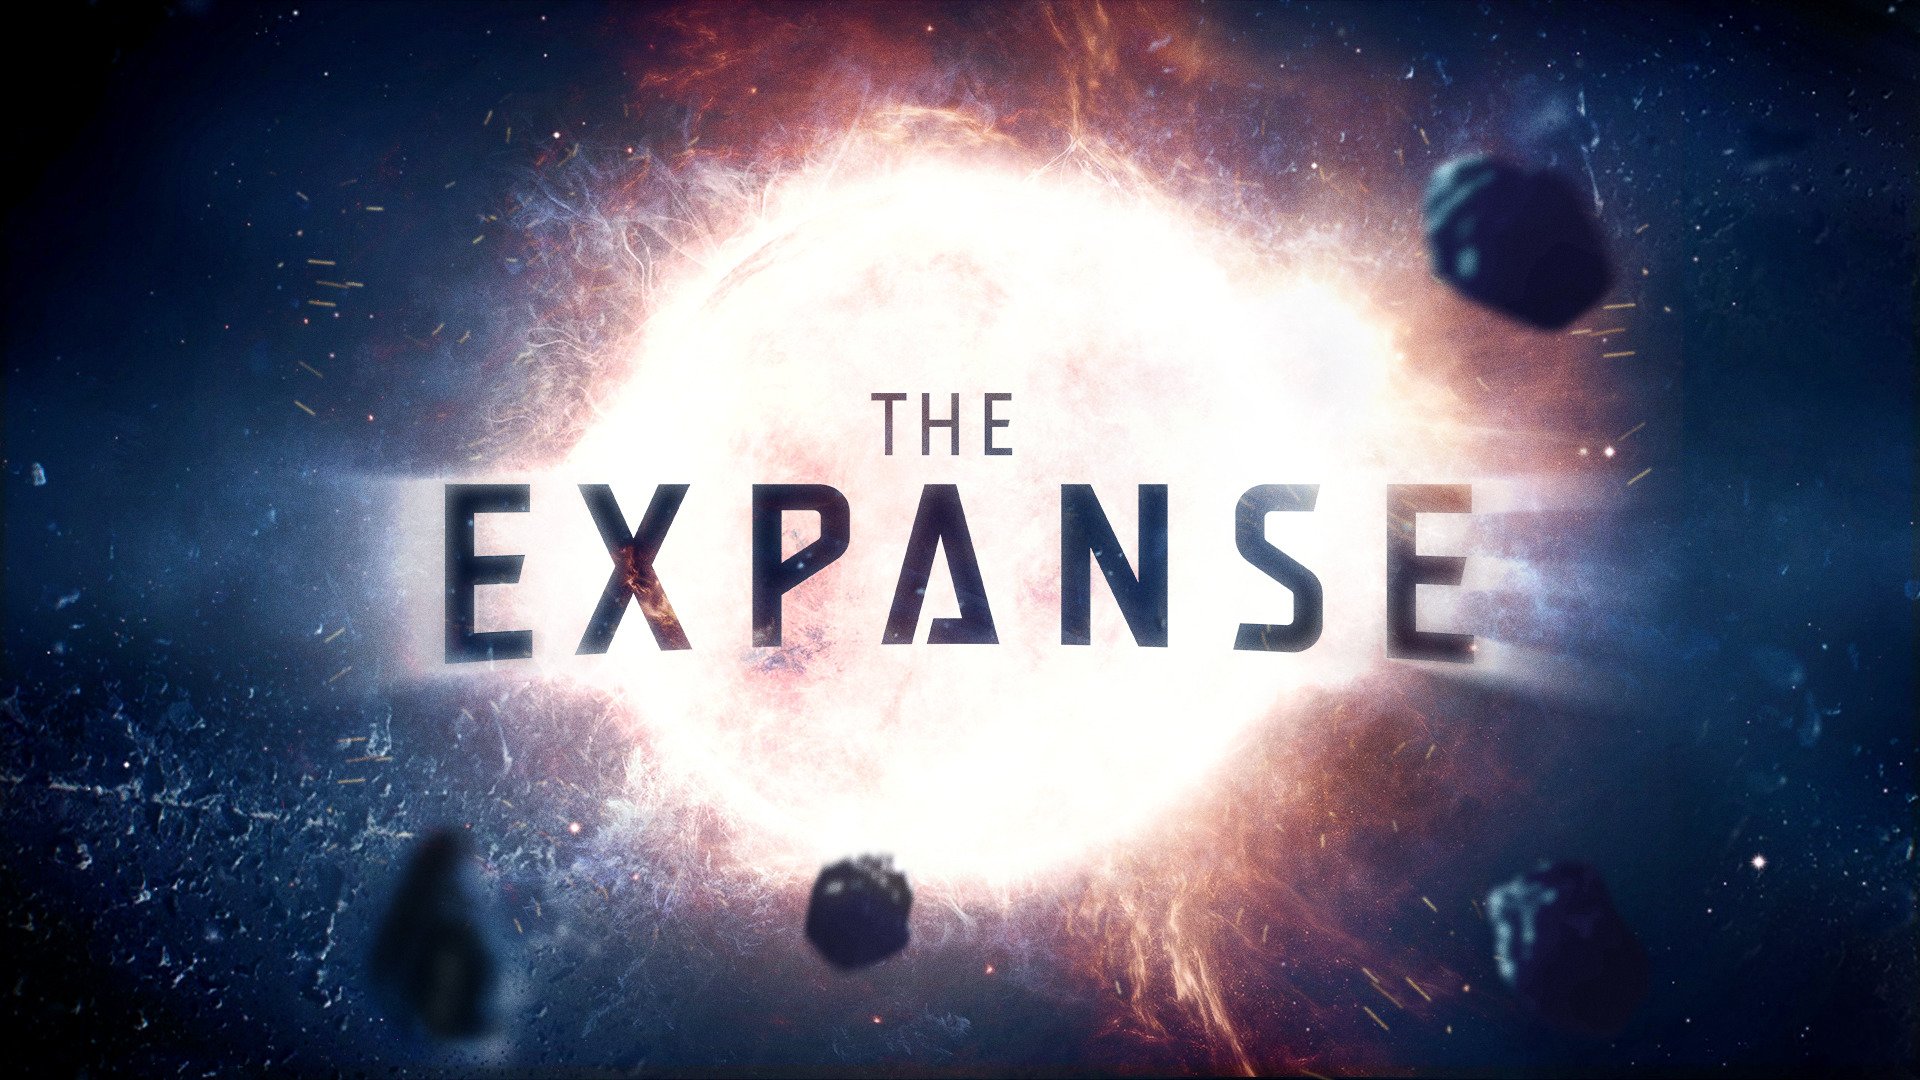 the expanse, Science fiction, Typography, Space Wallpaper